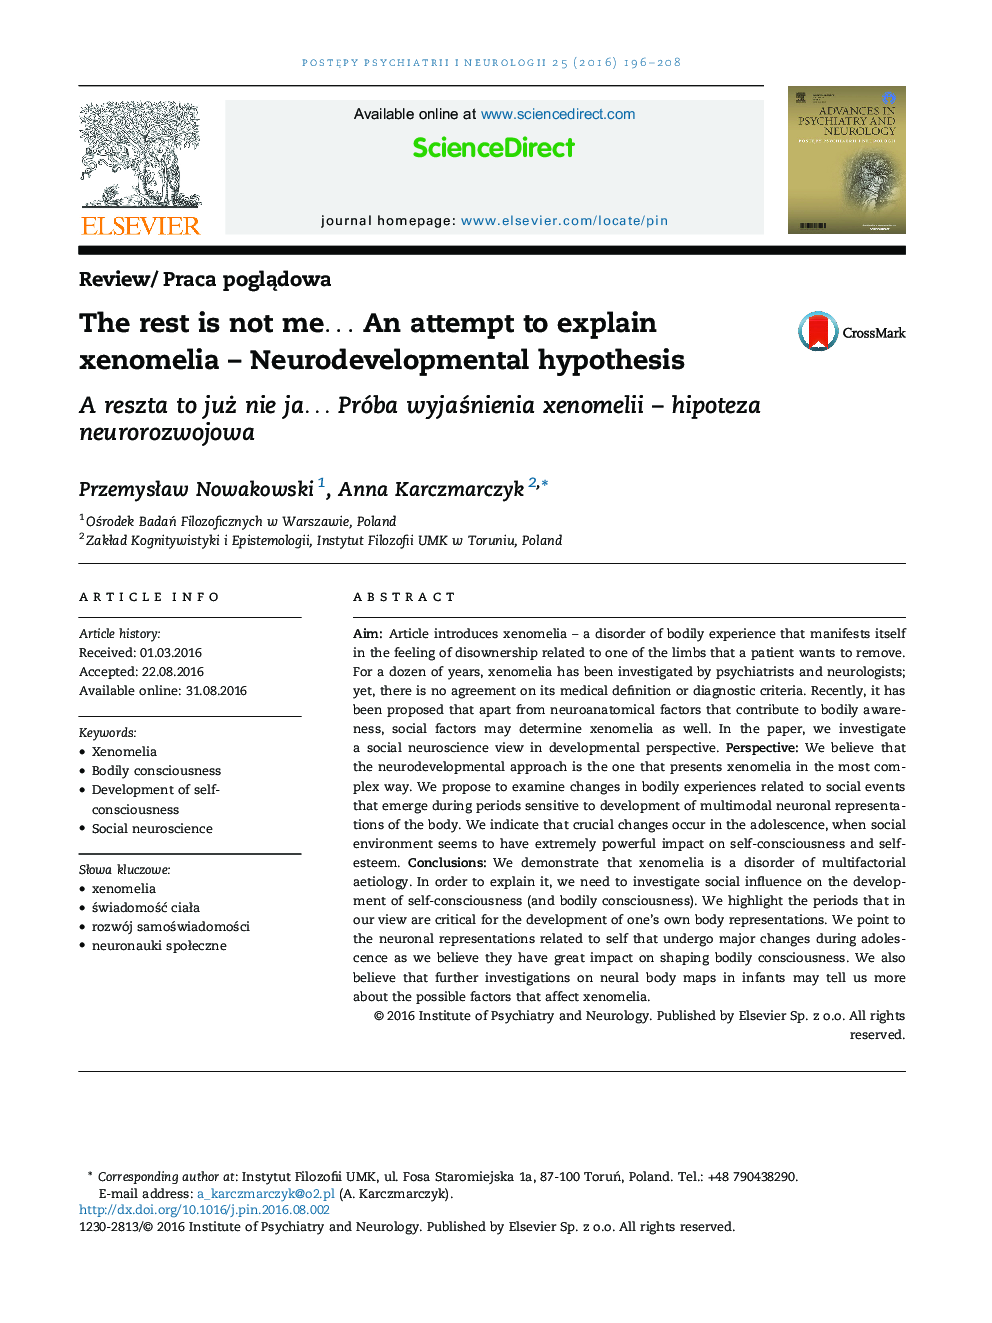 The rest is not meâ¦ An attempt to explain xenomelia - Neurodevelopmental hypothesis